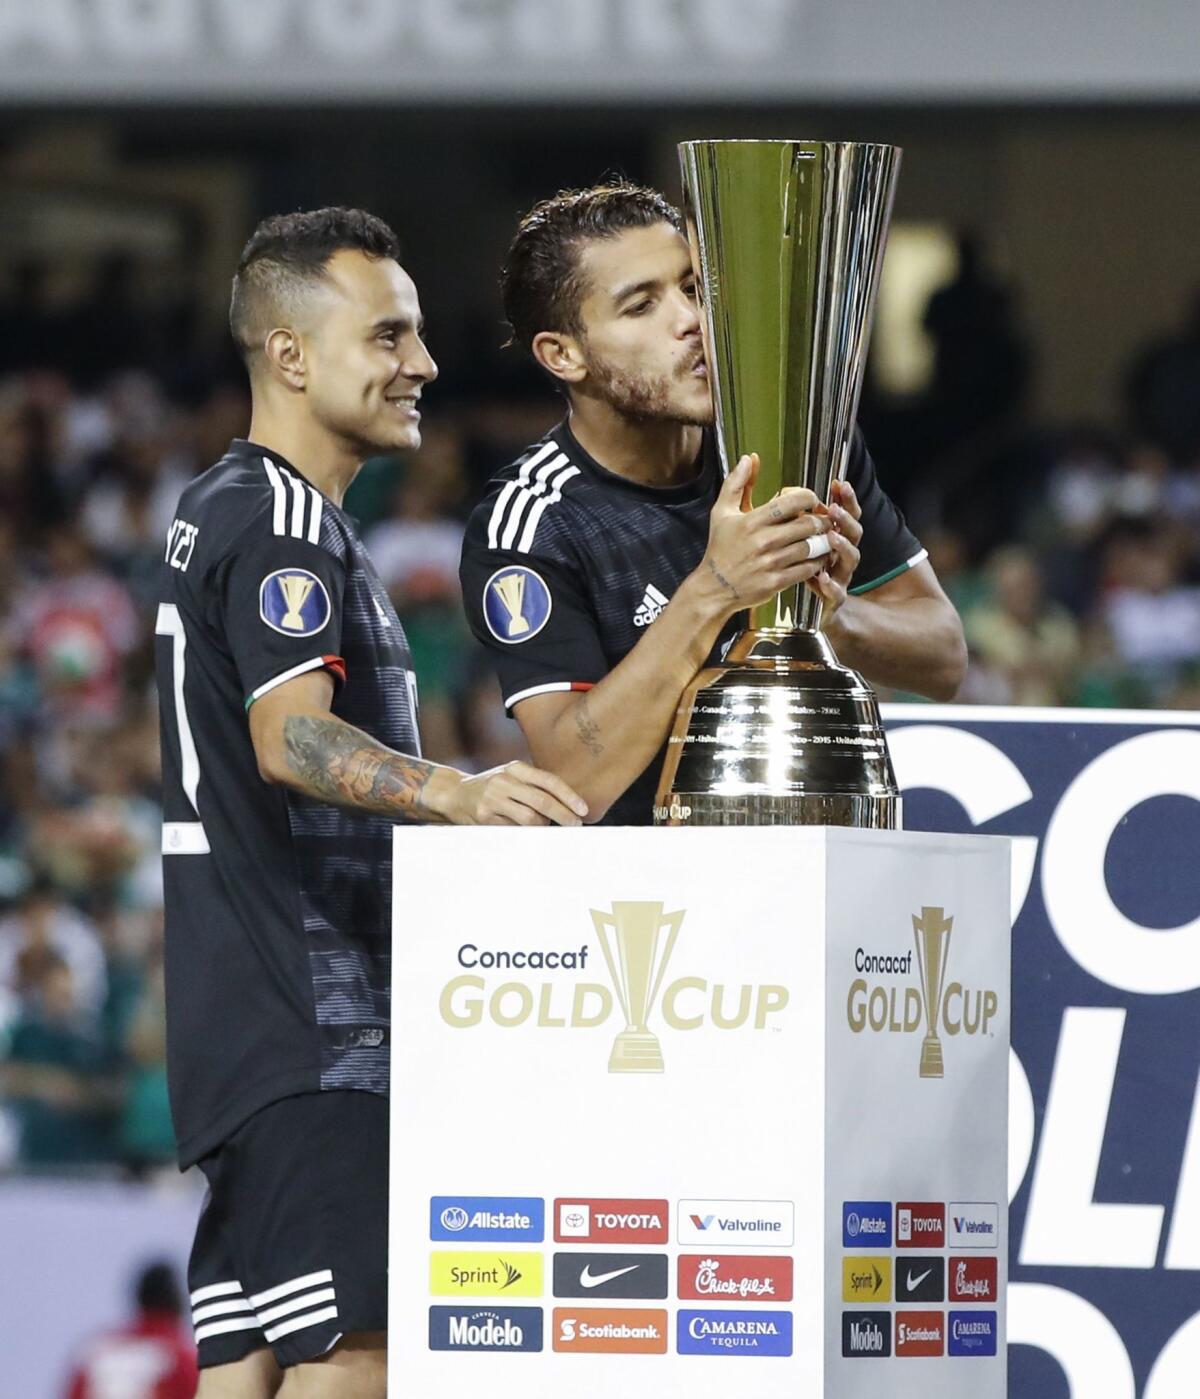 Mexico midfielder Jonathan Dos Santos (R) kisses the Gold Cup after beating the US during the 2019 Concacaf Gold Cup final football match between USA and Mexico on July 7, 2019 at Soldier Field stadium in Chicago, Illinois. - Mexico defeated the US 1-0.